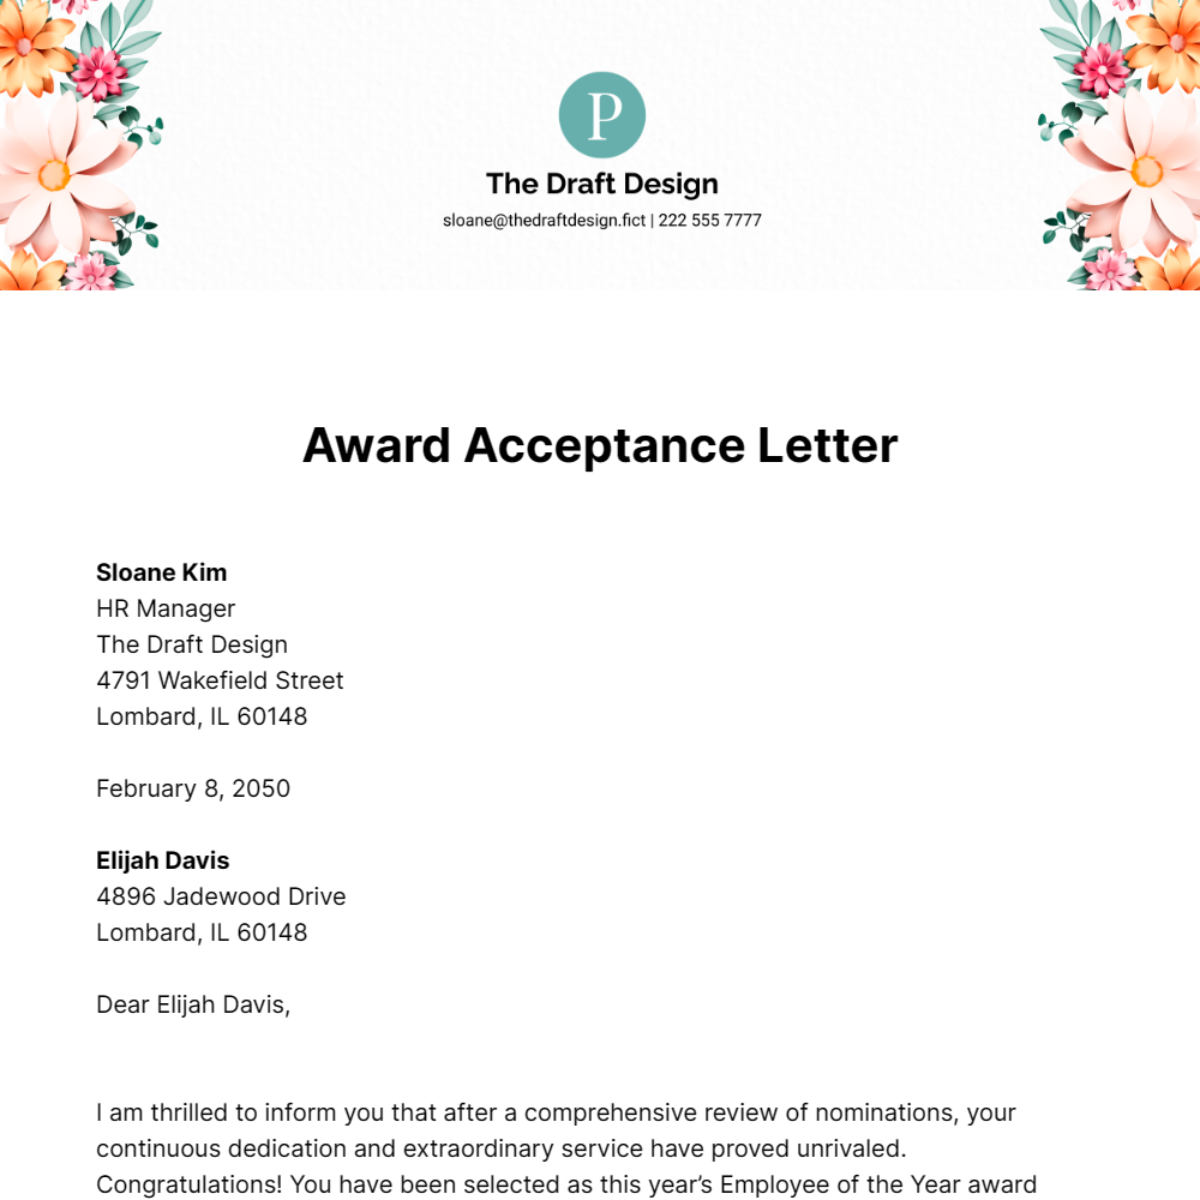 Award Acceptance Letter Template